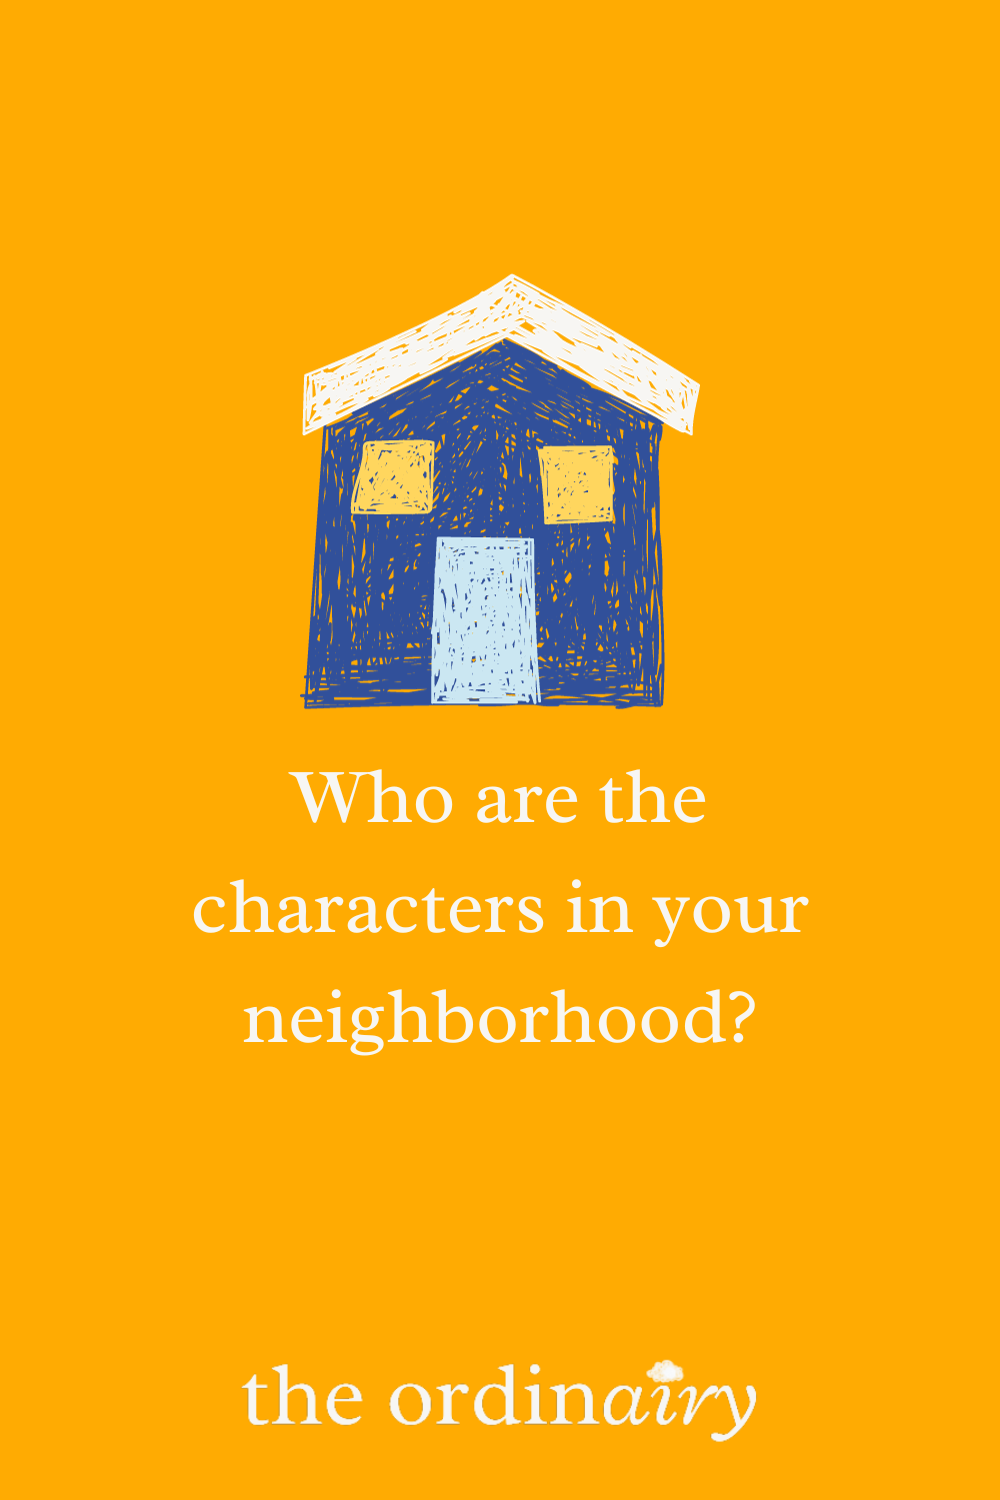 Who are the characters in your neighborhood?